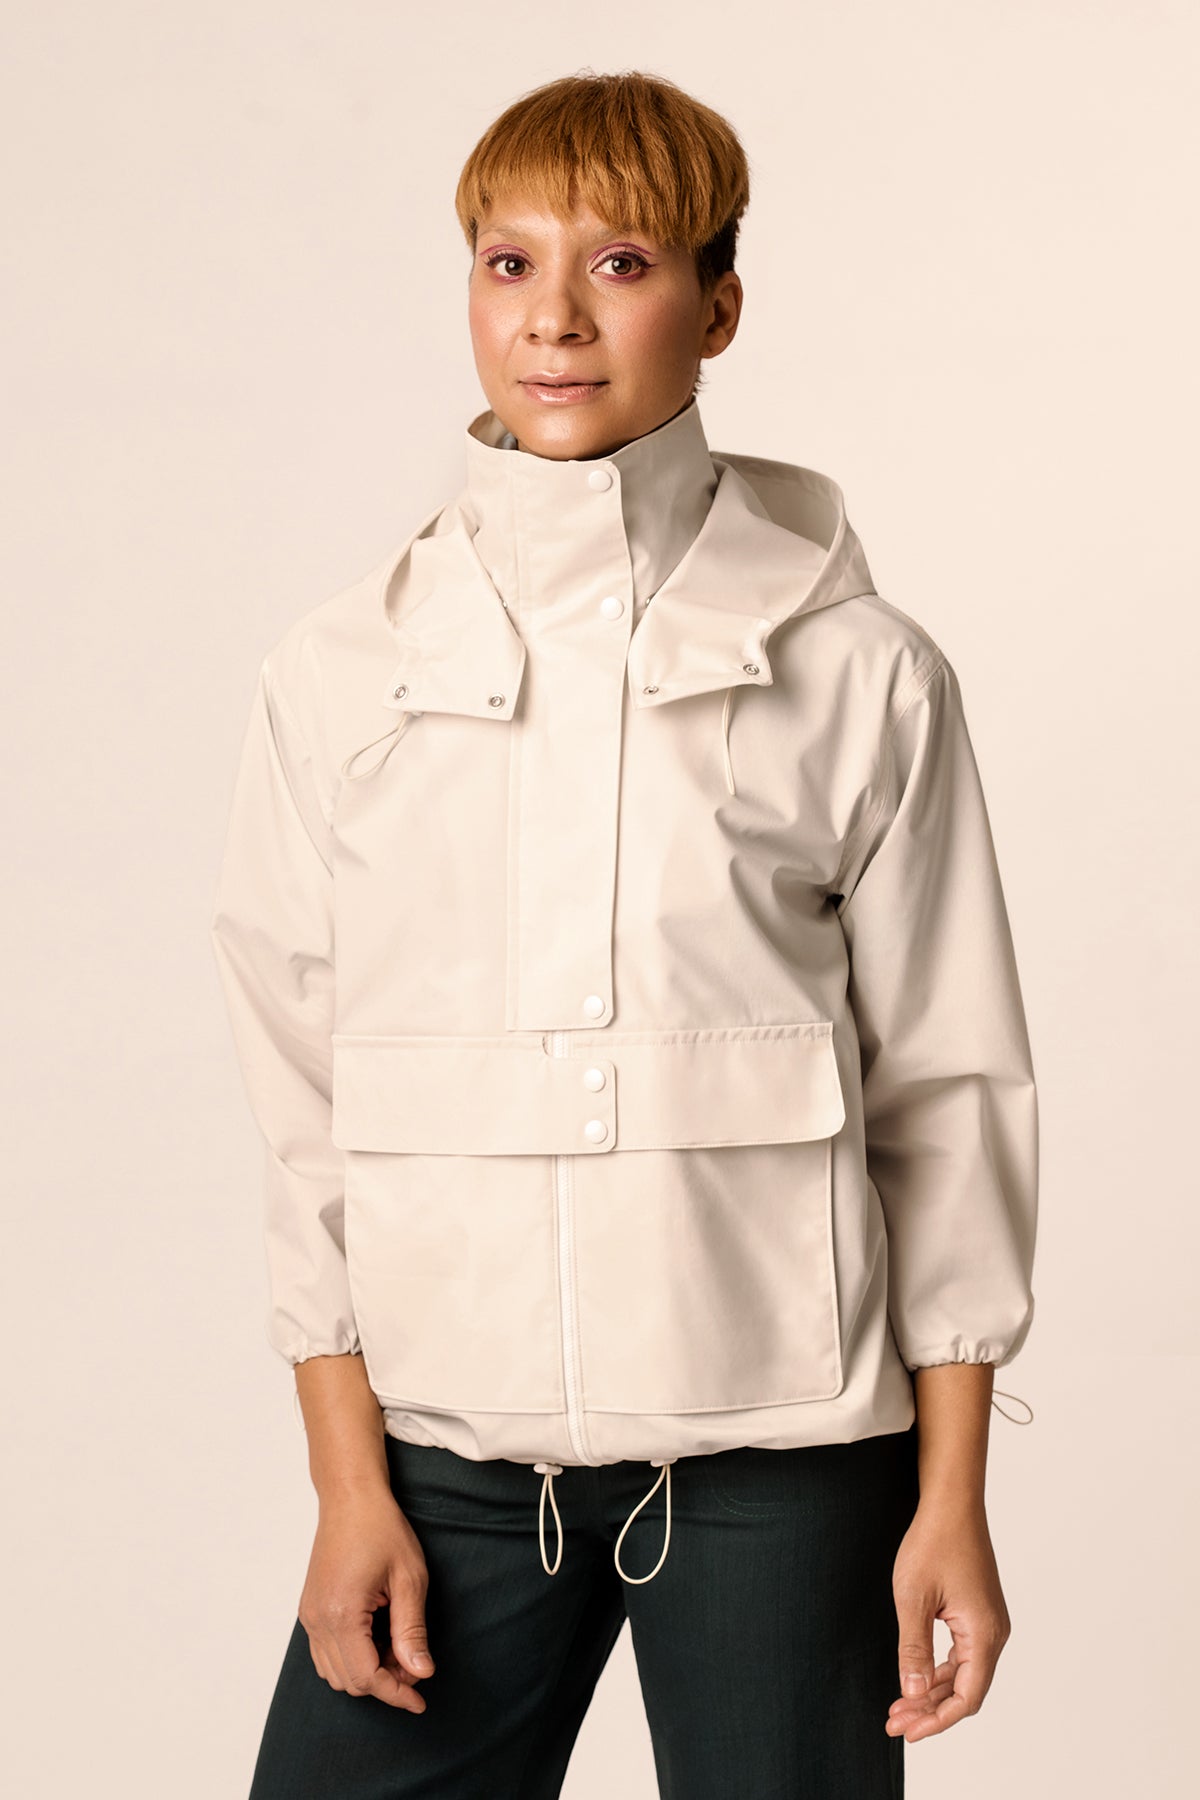 Woman wearing the Sirkka Hooded Jacket sewing pattern from Named on The Fold Line. A jacket pattern made in light outerwear fabrics, featuring a detachable hood, long sleeves, zip closure with zipper shield and snap button closure, high collar, large patc